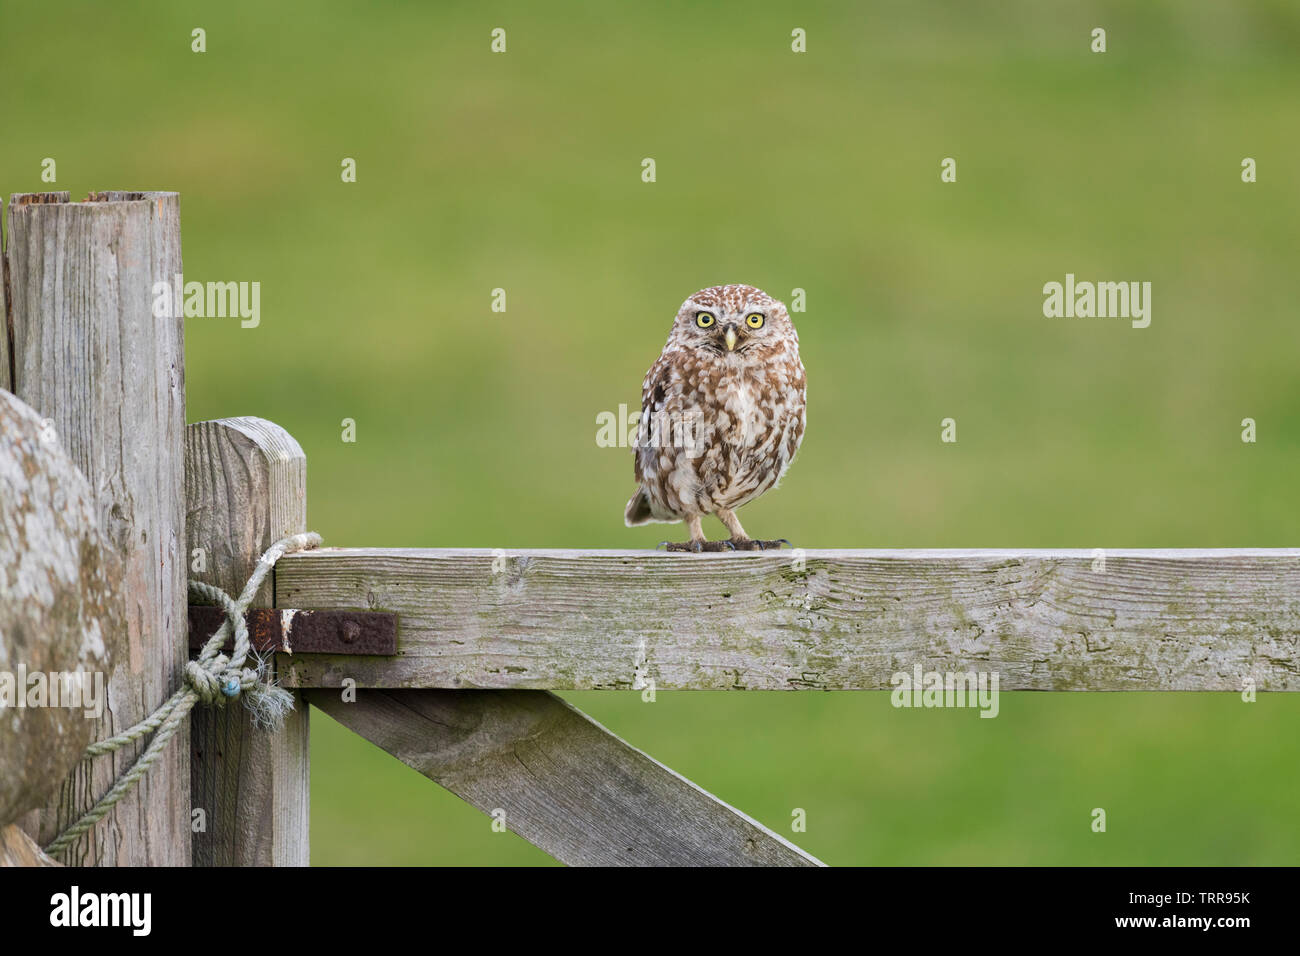 Early morning sunrise with Little owl sitting on the fence & gate watching what's going on in the farmers field. Stock Photo